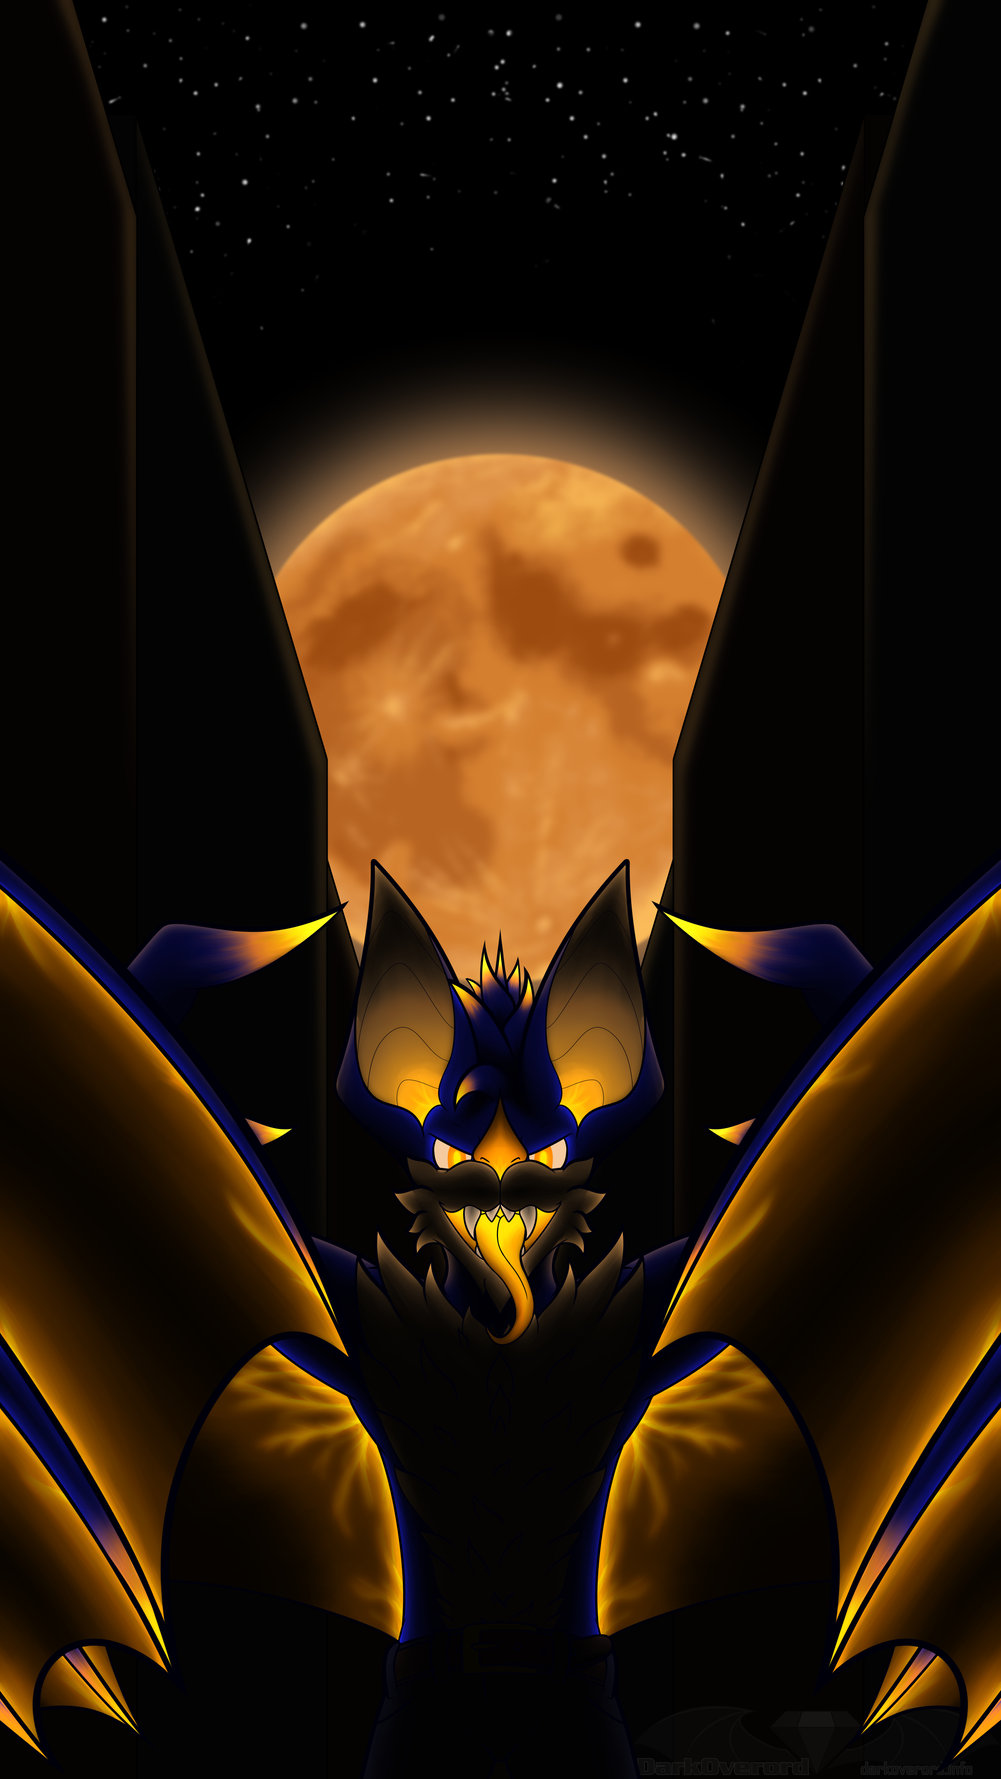 A blue and orange anthropomorphic bat (Ferris BruBat) in darkness. His wing-arms stretched out towards as you can clearly see his eyes glow as well as some of his fur, some exposed areas of his skin and some veins in his wings